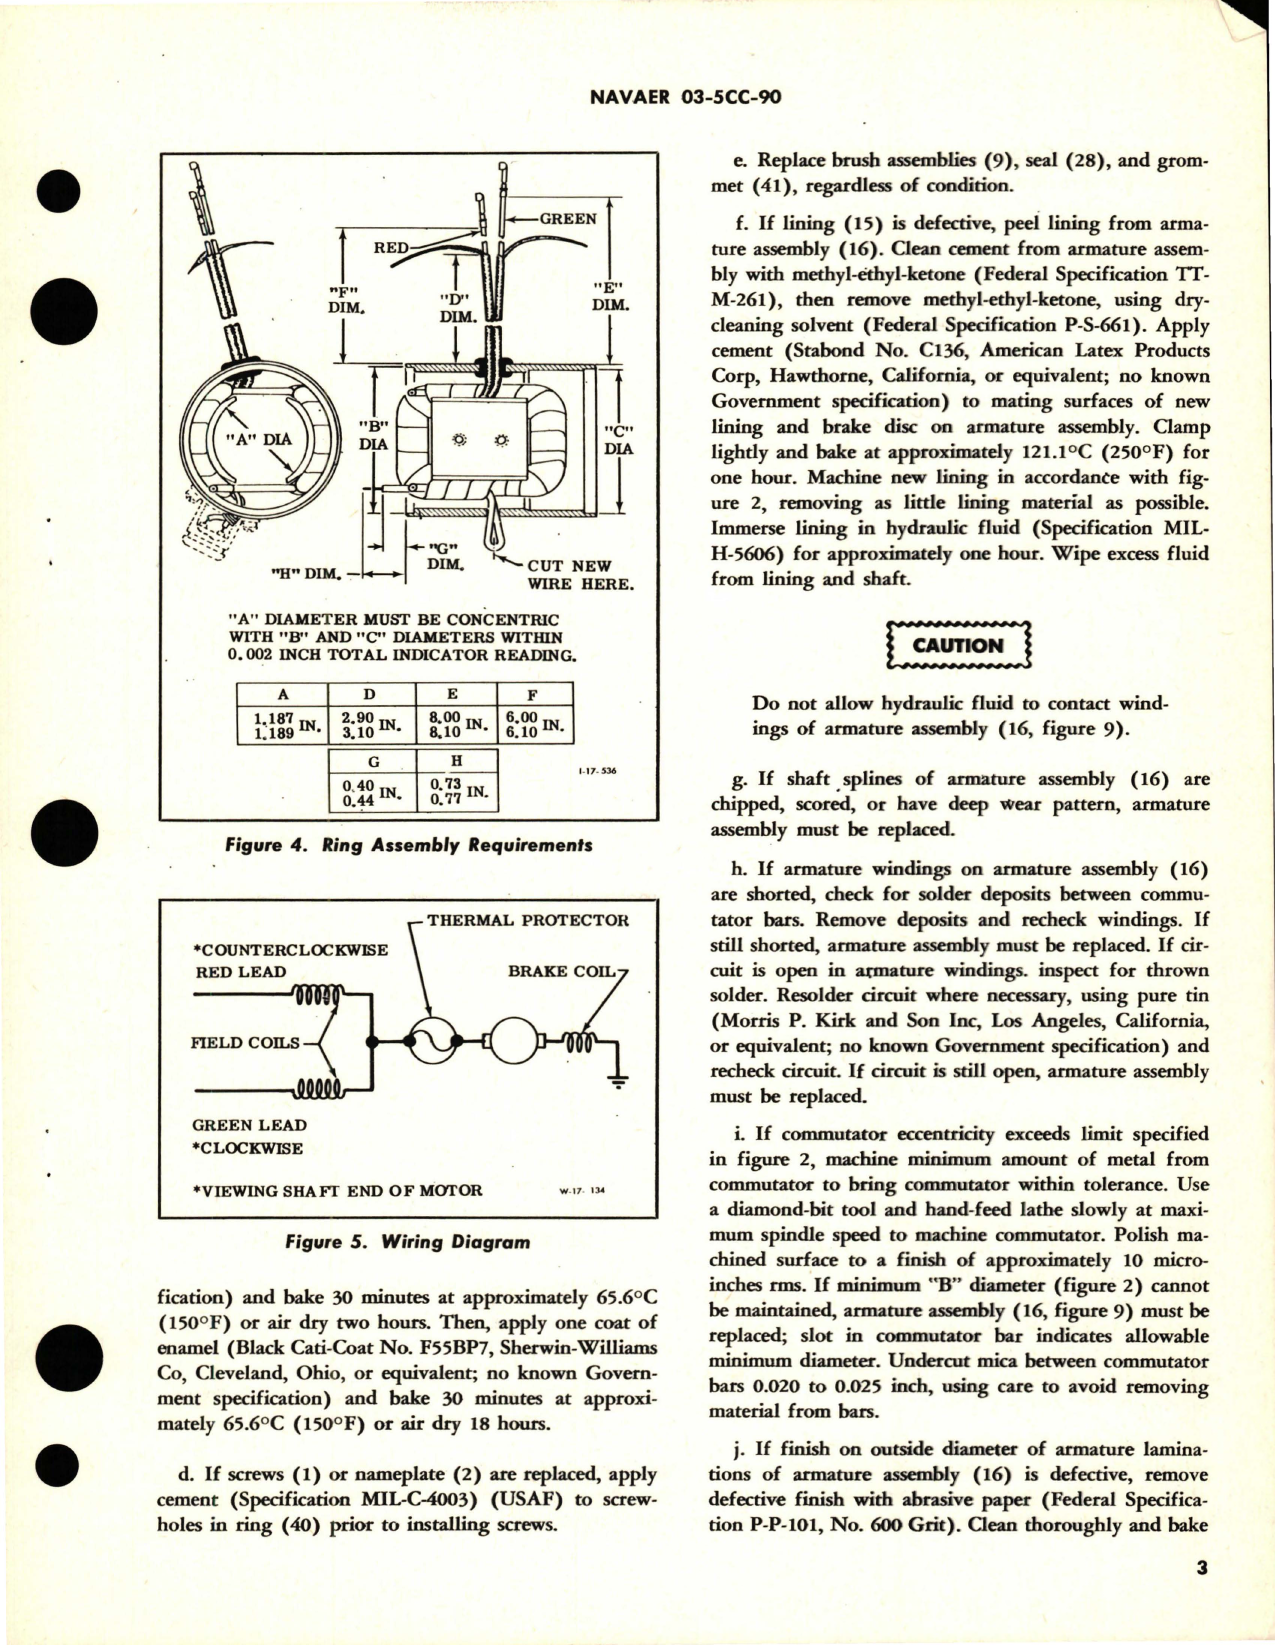 Sample page 5 from AirCorps Library document: Overhaul Instructions with Parts Breakdown for Direct -Current Motor 0.08HP 26 Volt - Part 26300-2